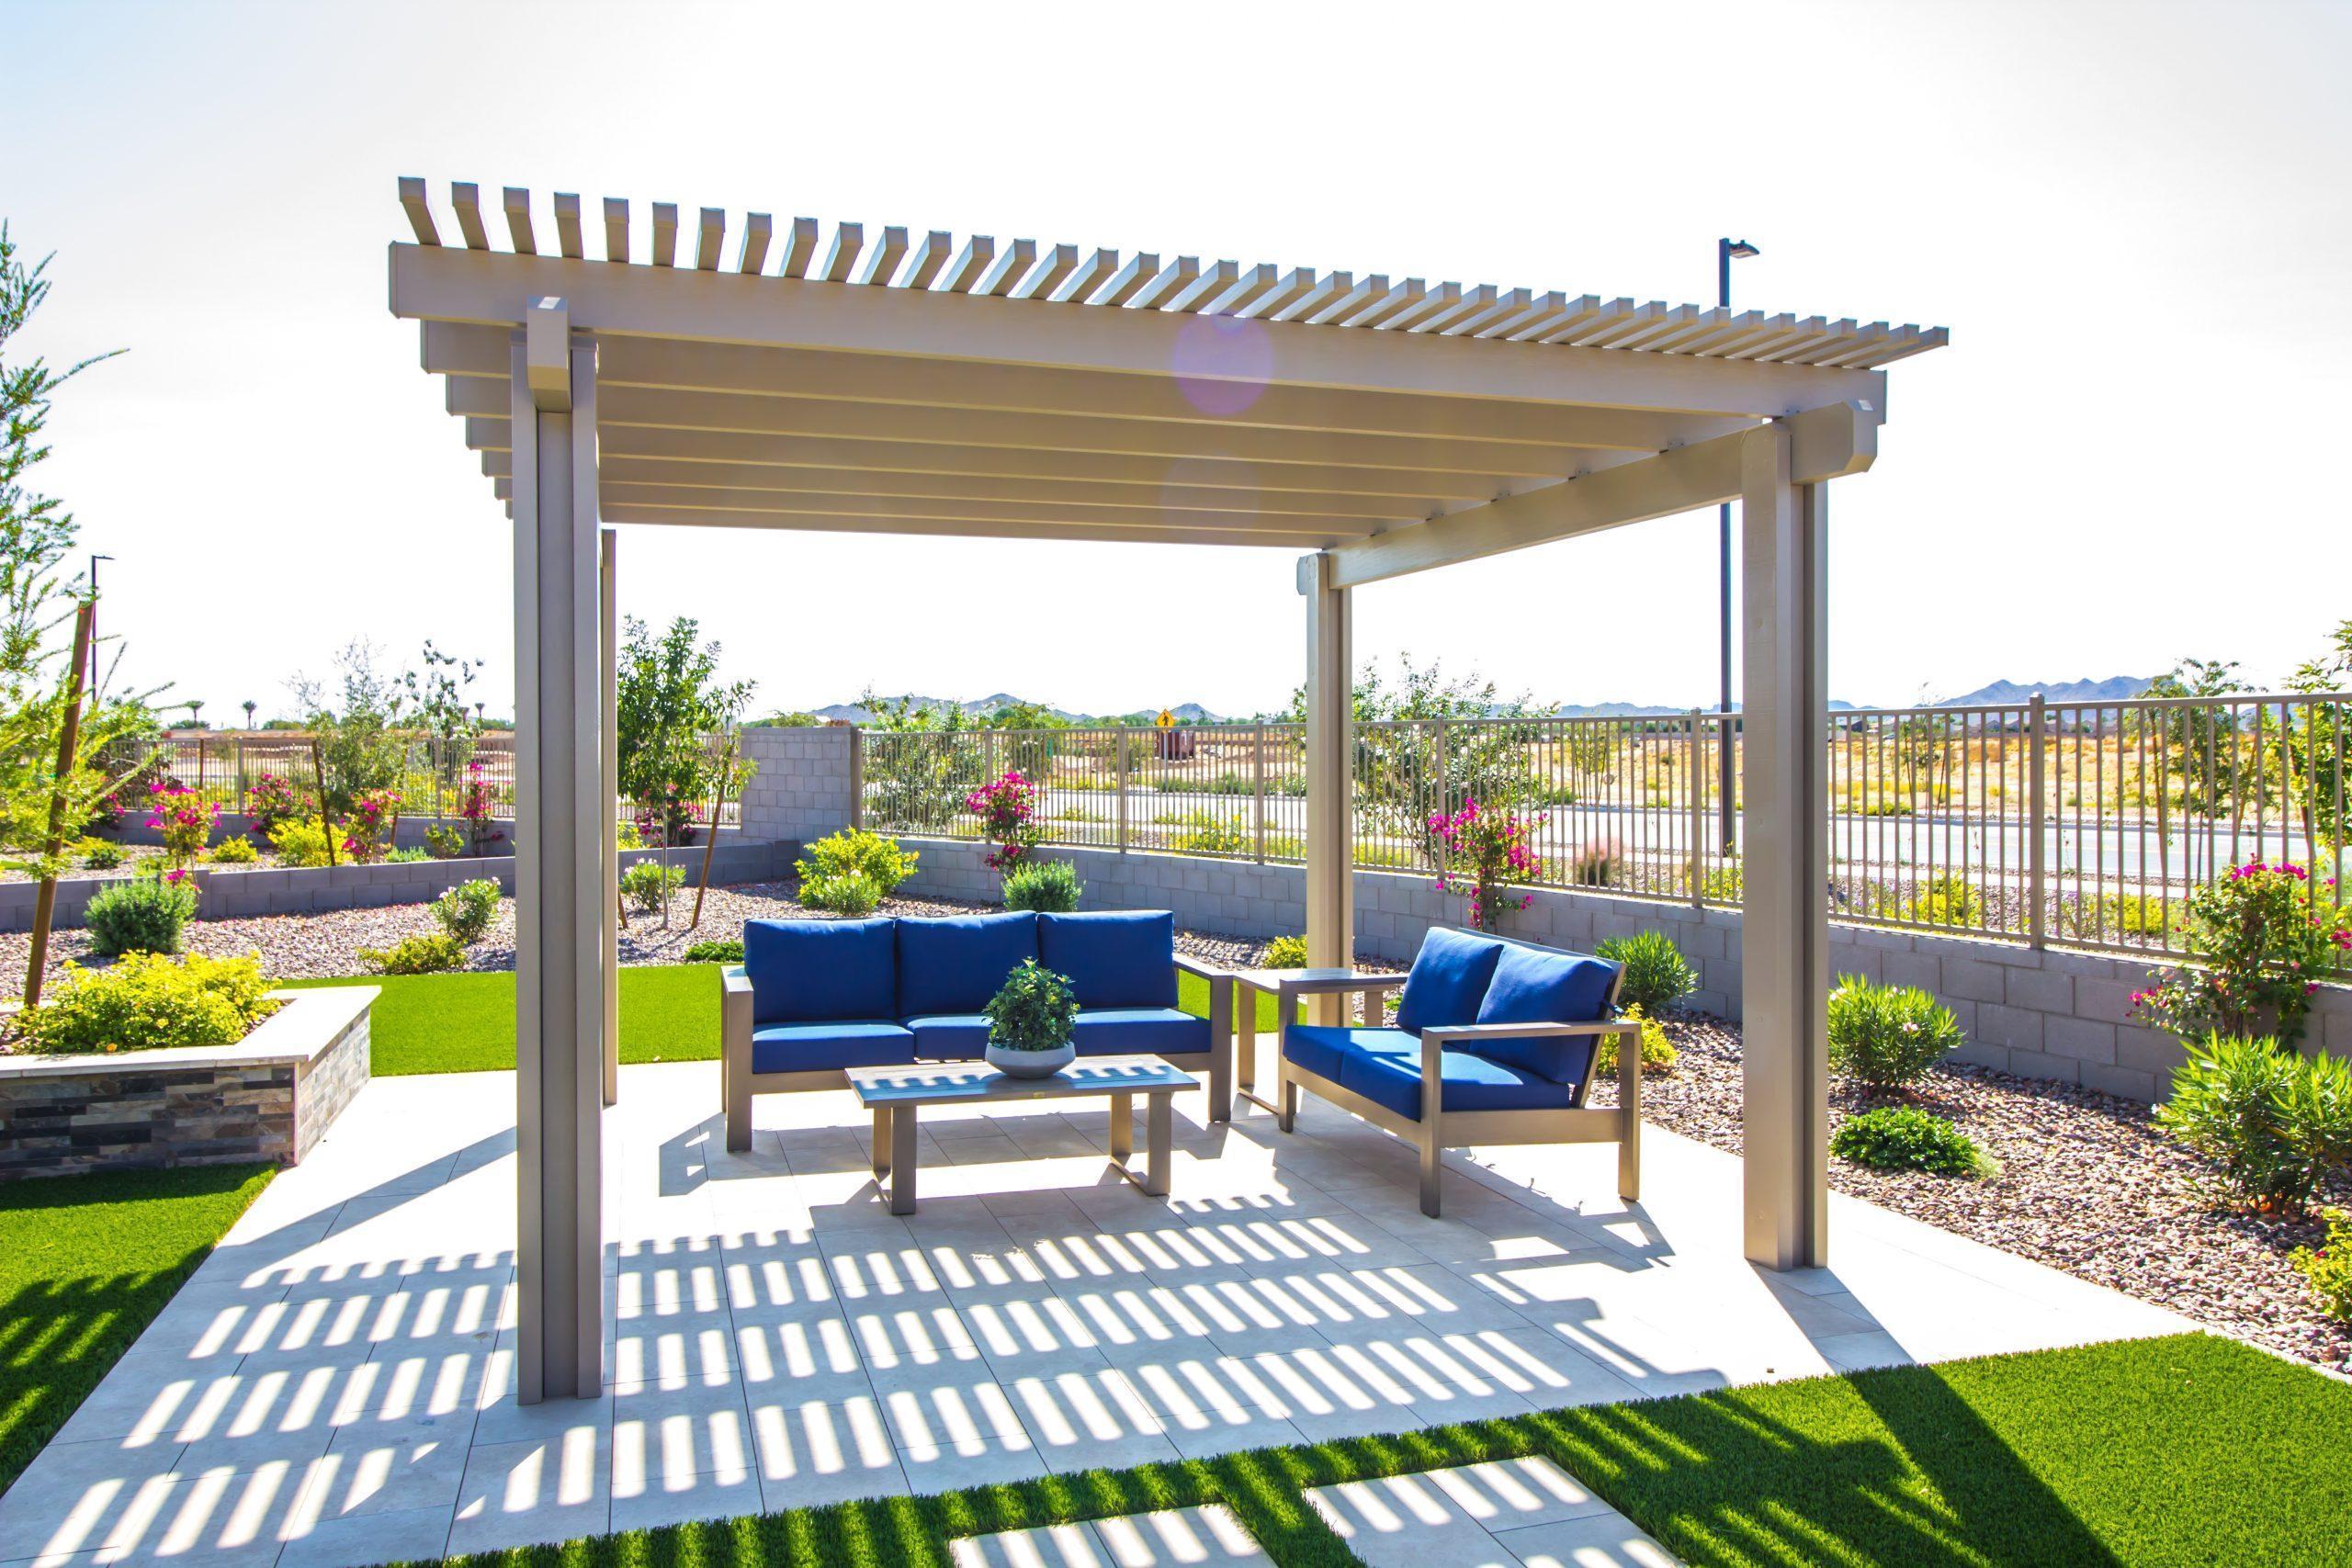 7 Things You Need To Know About Buying Outdoor Furniture